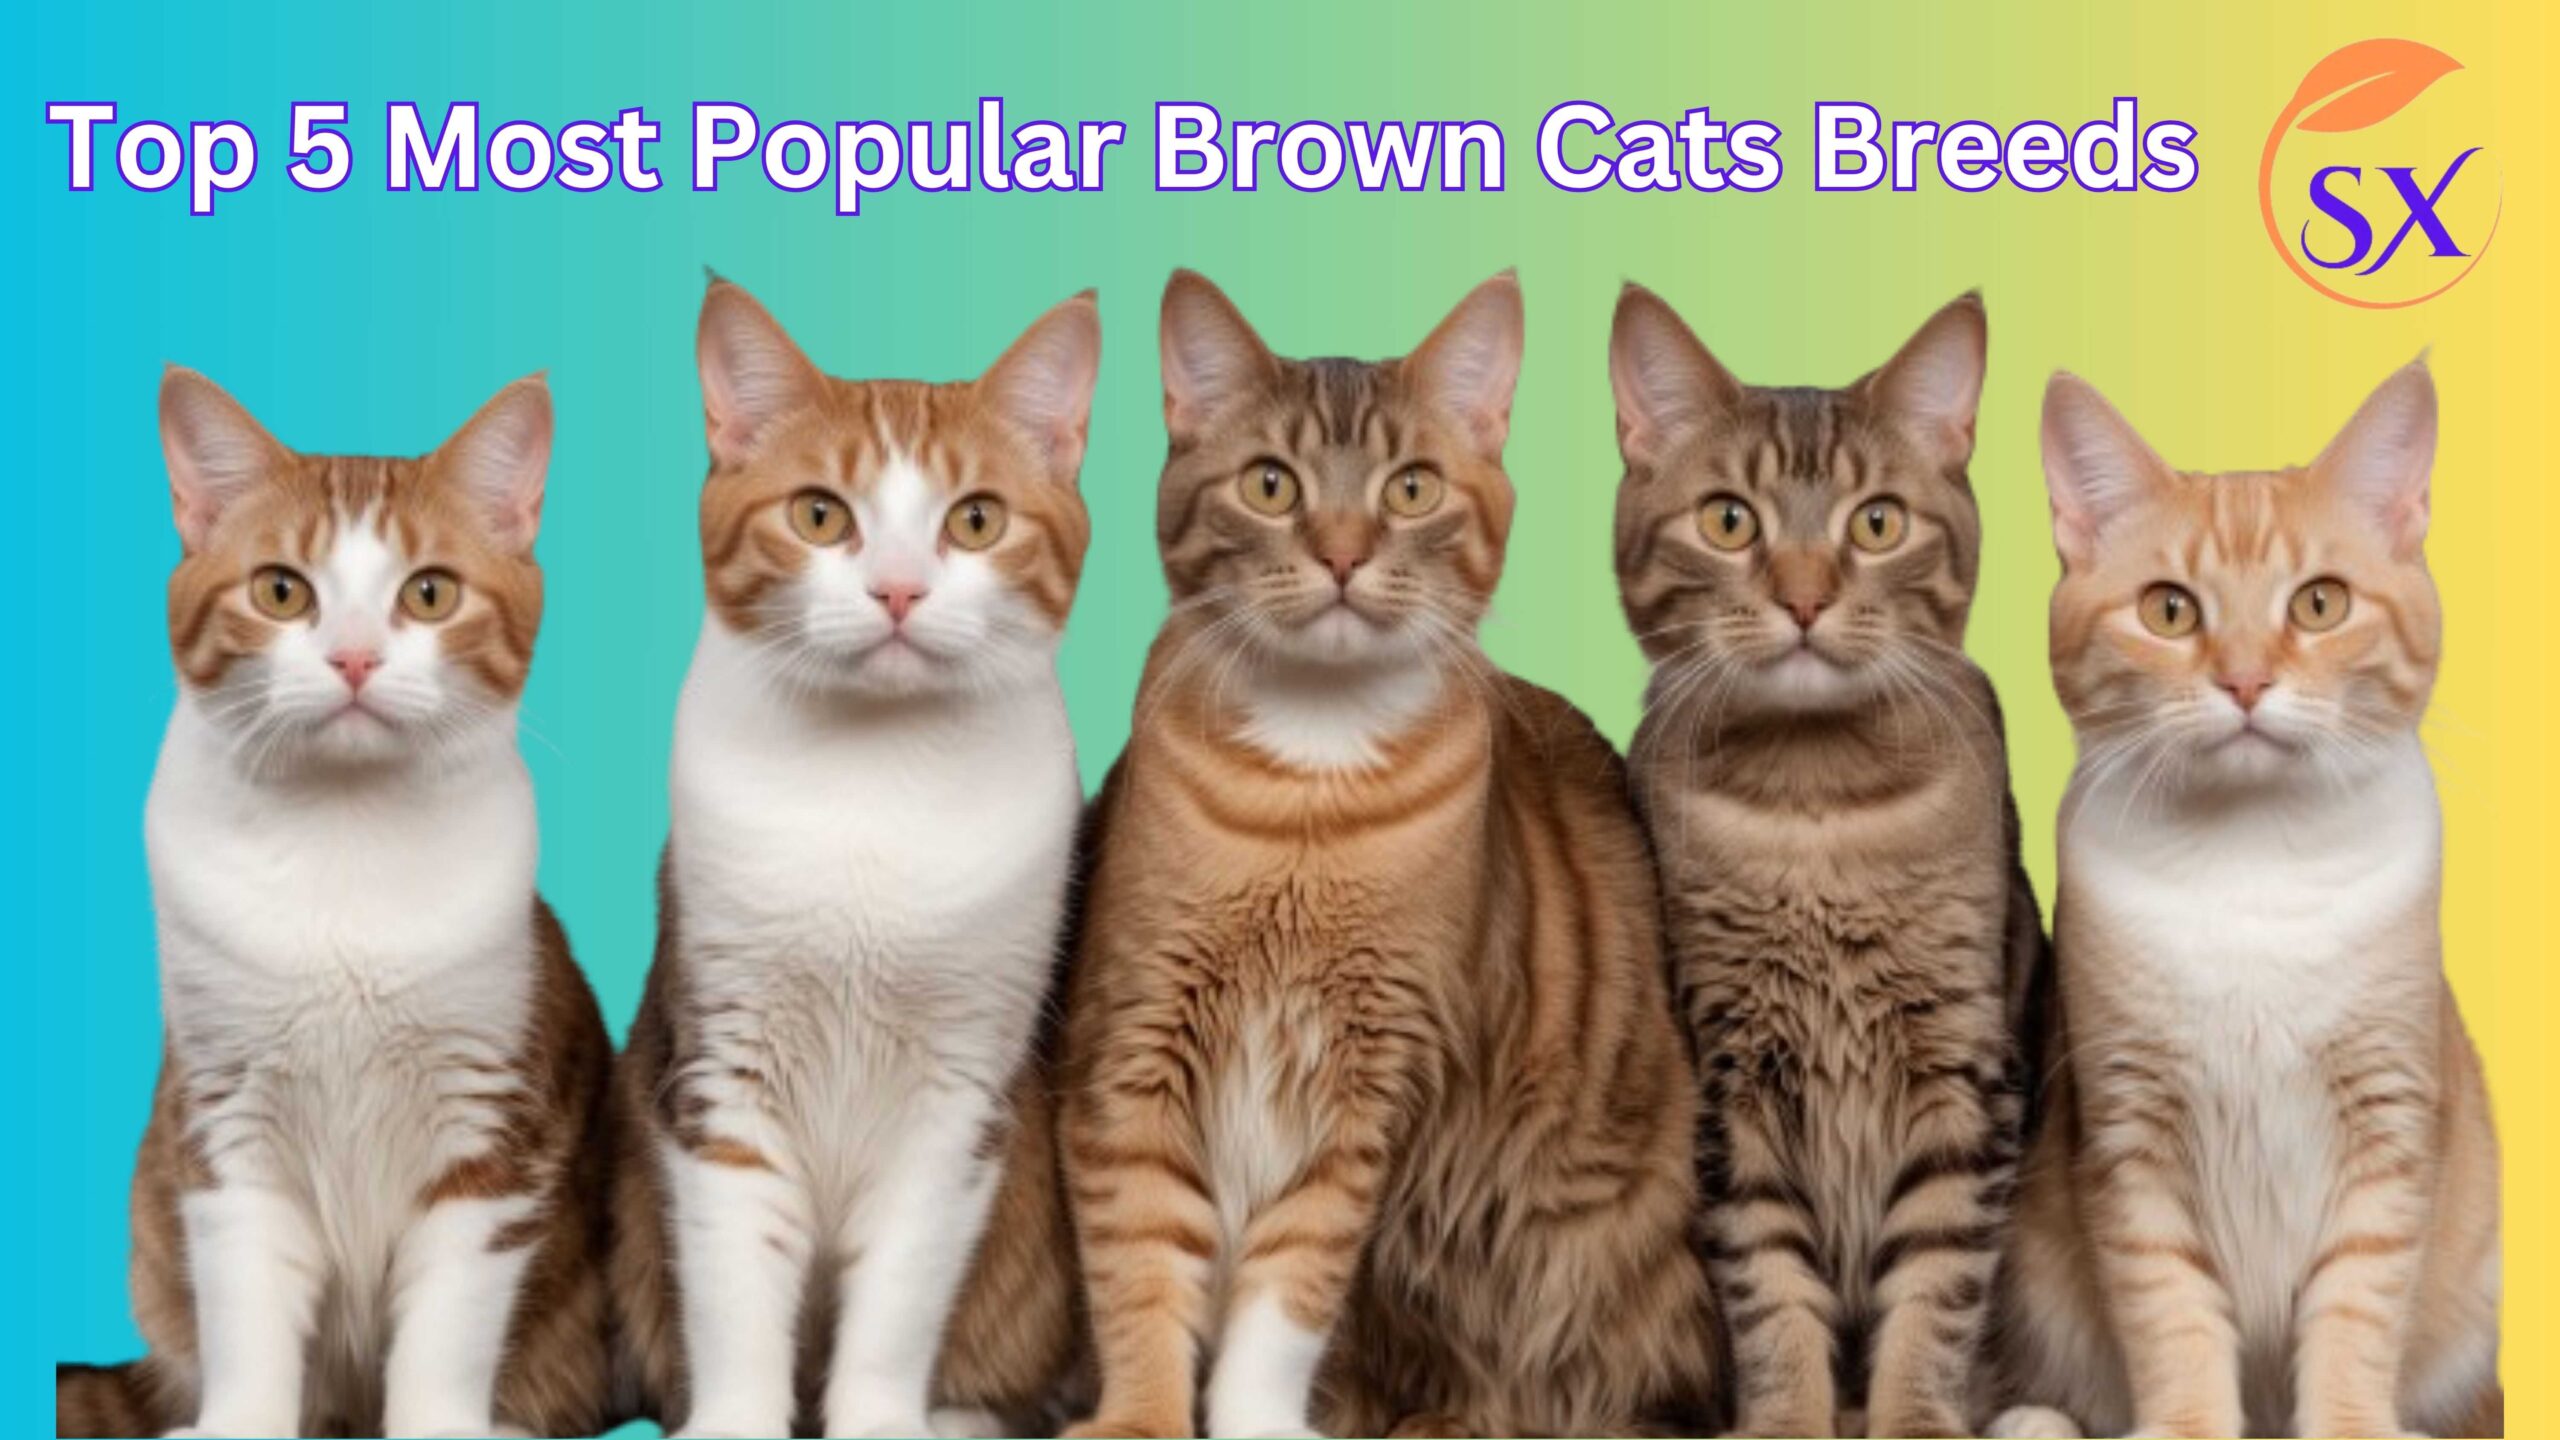 Top 5 Most Popular Brown Cats Breeds in the World